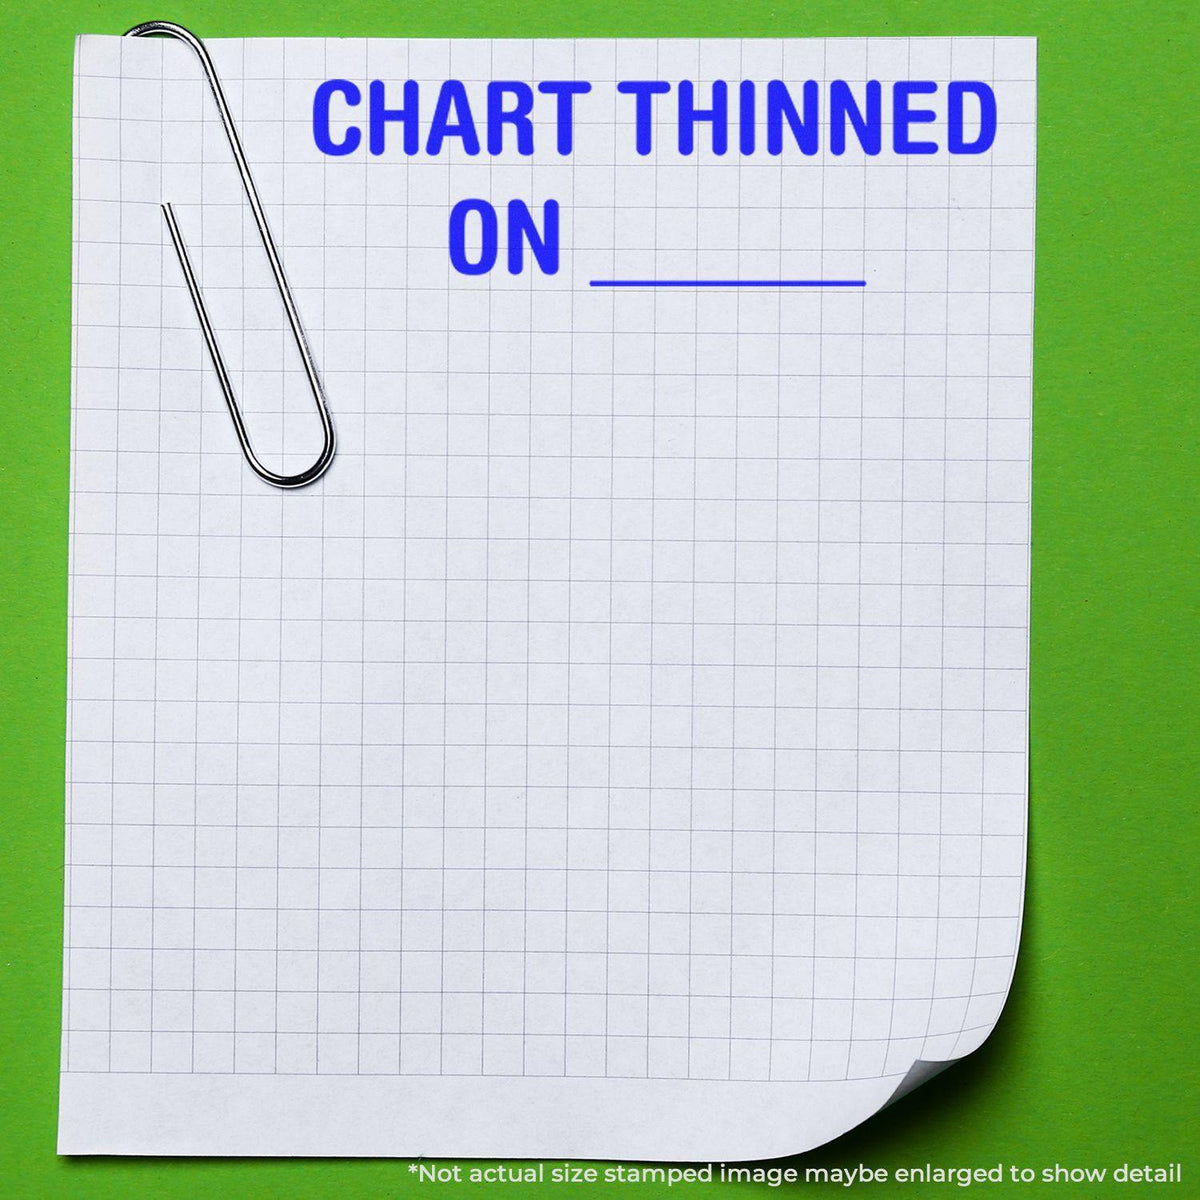 Self Inking Chart Thinned On Stamp - Engineer Seal Stamps - Brand_Trodat, Impression Size_Small, Stamp Type_Self-Inking Stamp, Type of Use_Medical Office